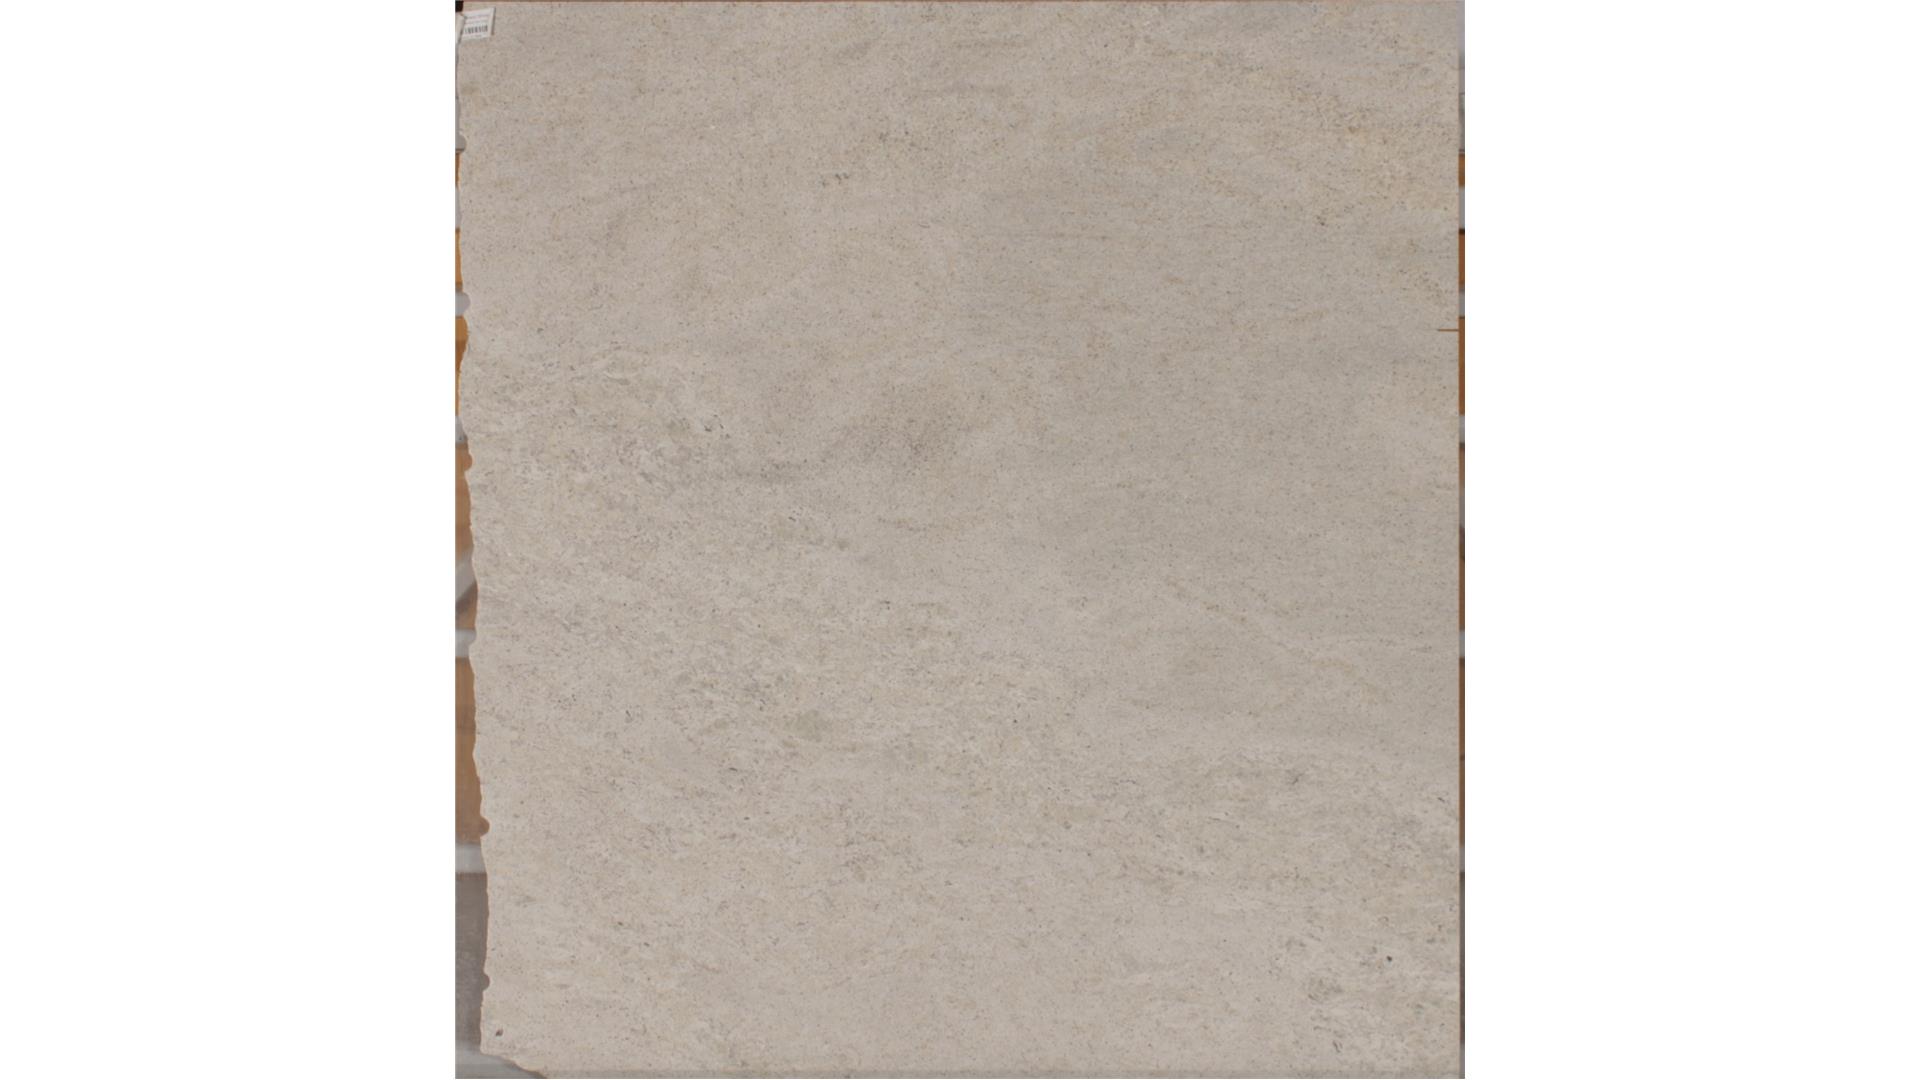 Kashmere White Leathered Natural Stone Slabs